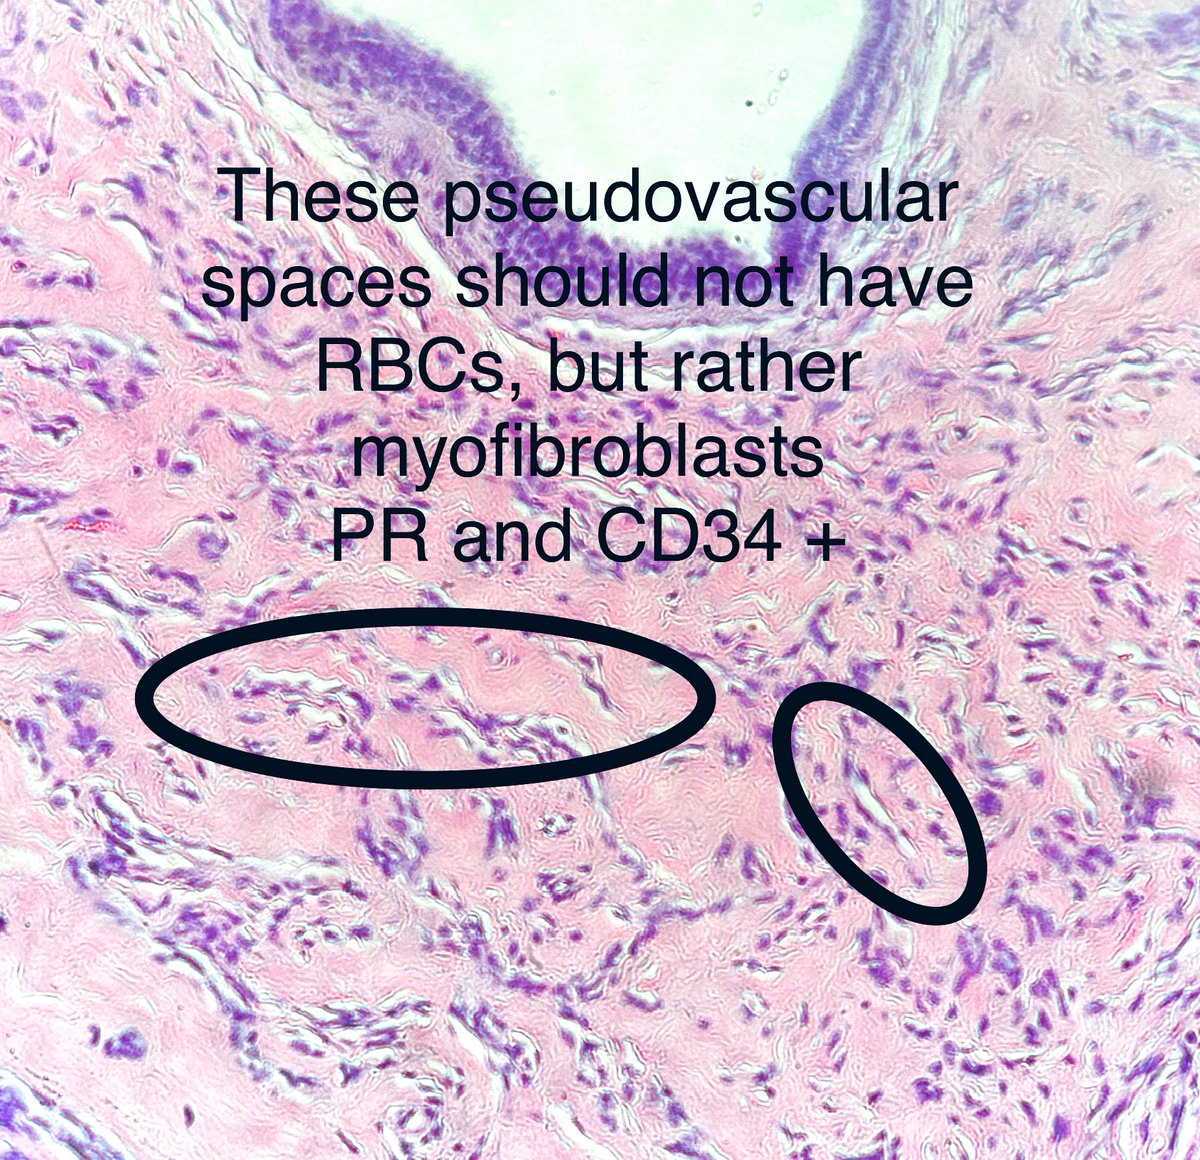 Not every breast mass is cancer

PASH: pseudoangiomatous stromal hyperplasia (now say that 10 times while running backwards) 

#pathx #breastx #pathology #medx #familymed #surgx #gensurg